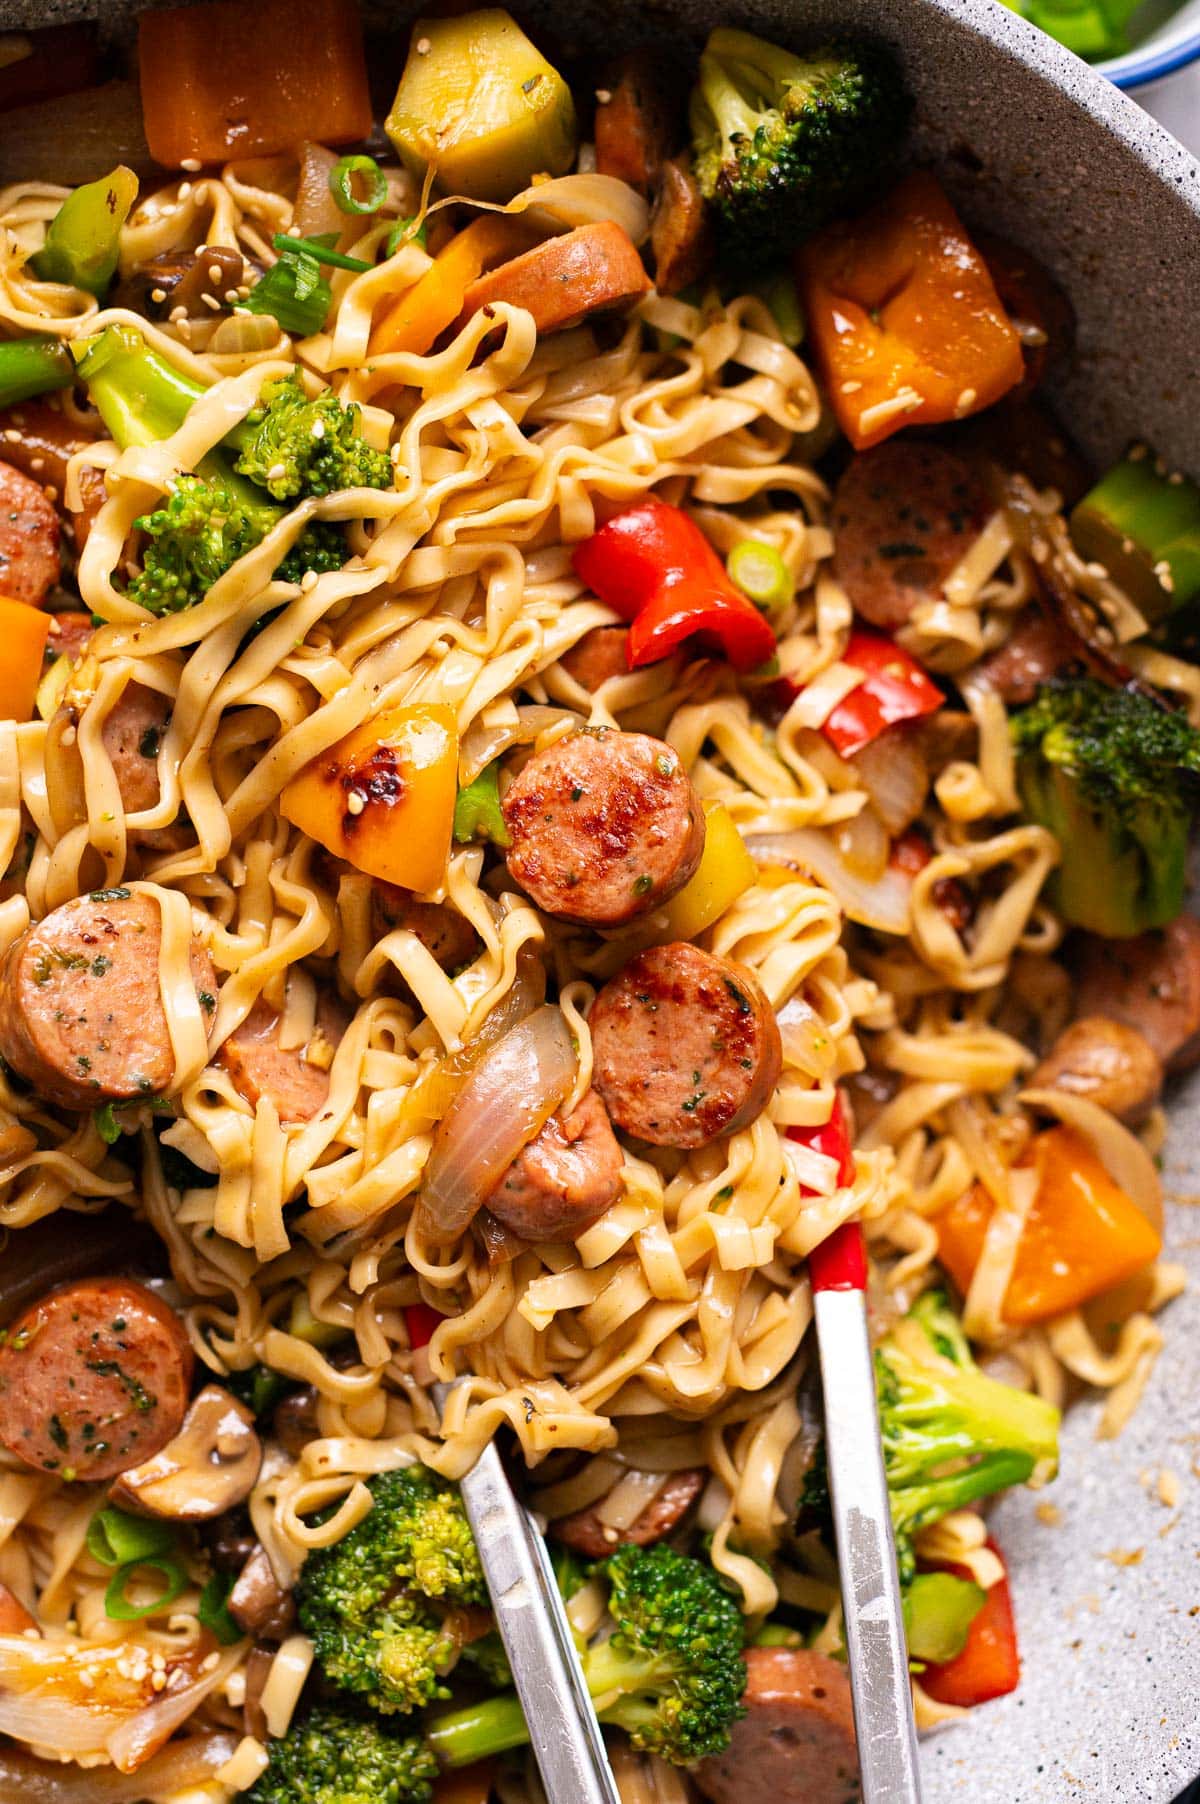 Sausage stir fry with broccoli, onions, bell peppers and noodles in a wok with tongs.